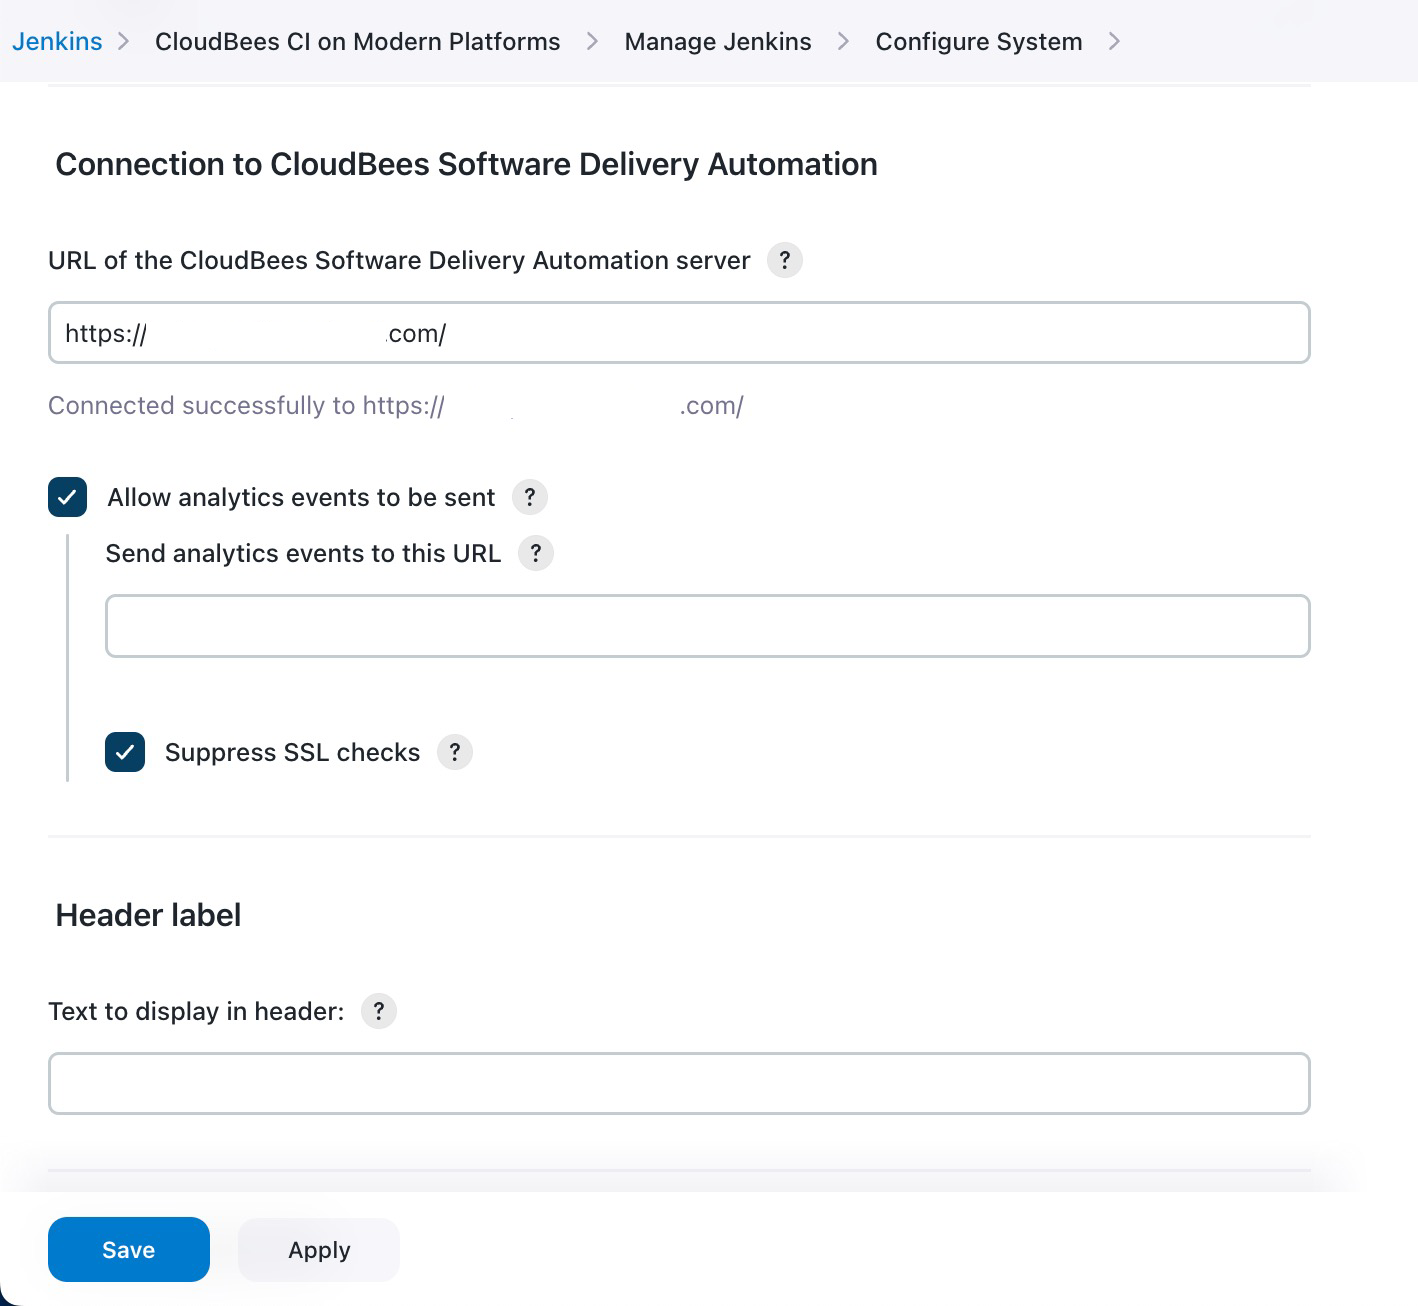 Connect to CloudBees Software Delivery Automation